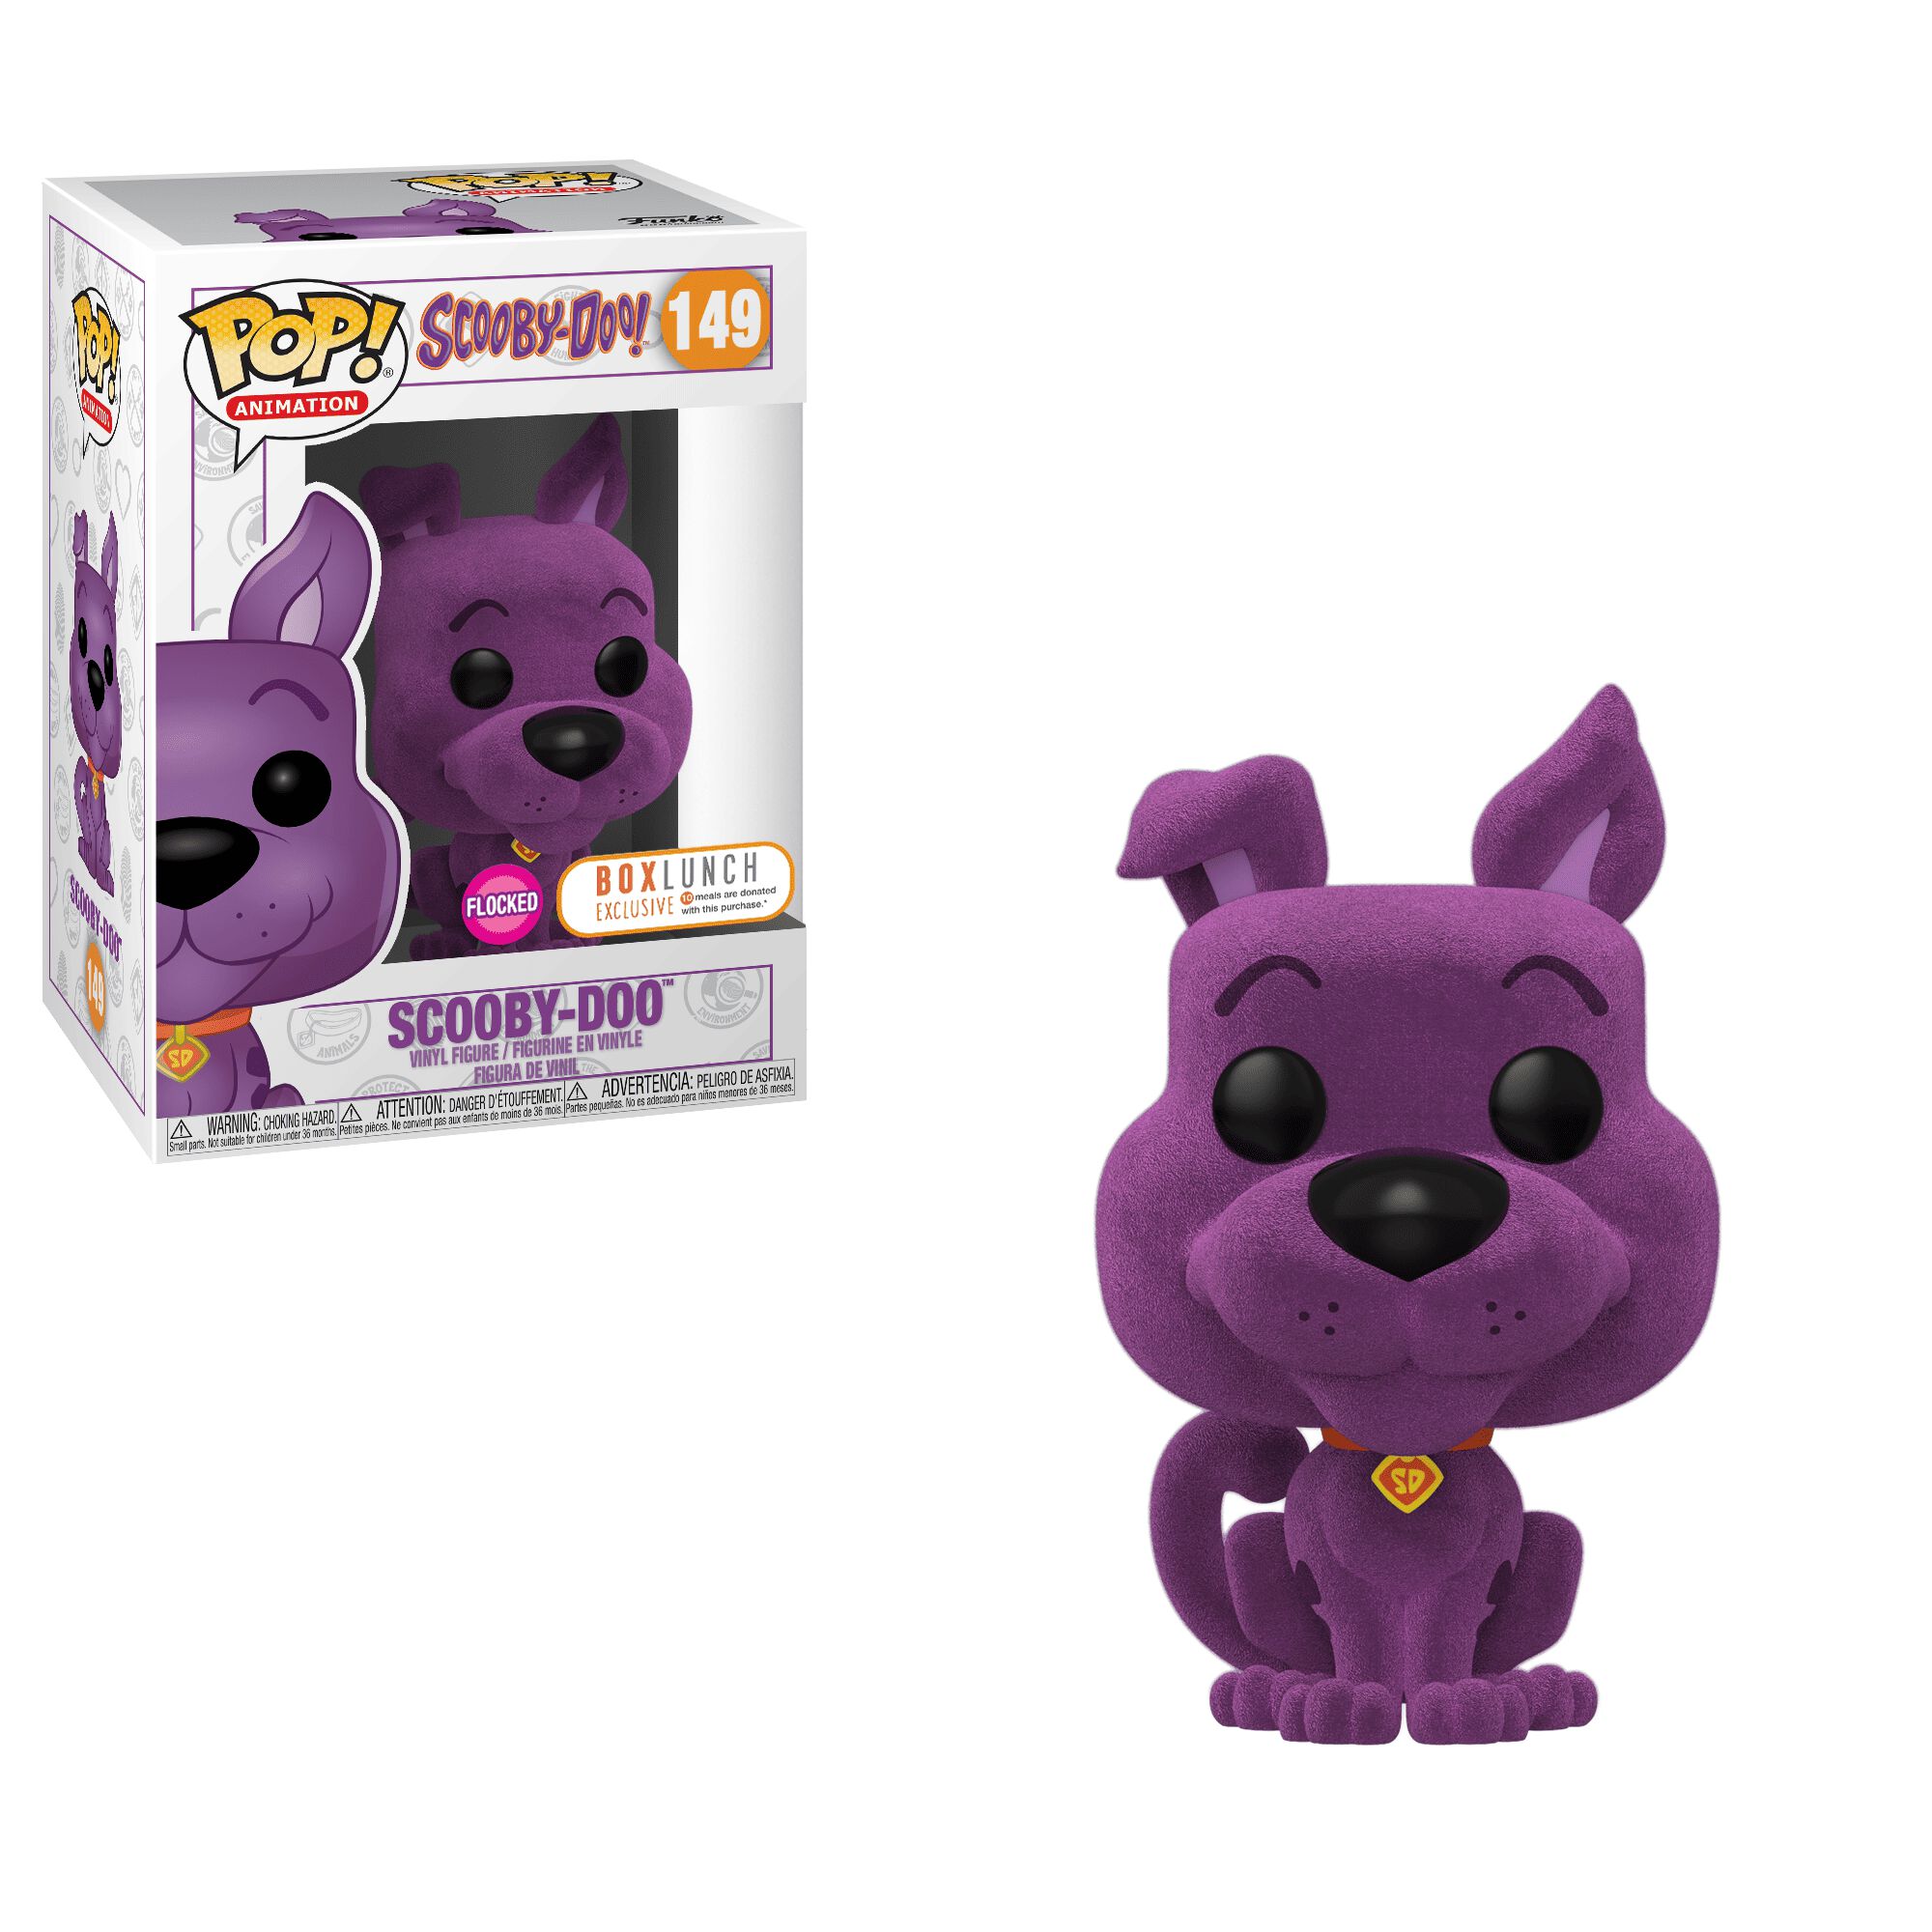 Coming soon: Boxlunch exclusive Pop! Animation - Scooby-Doo!